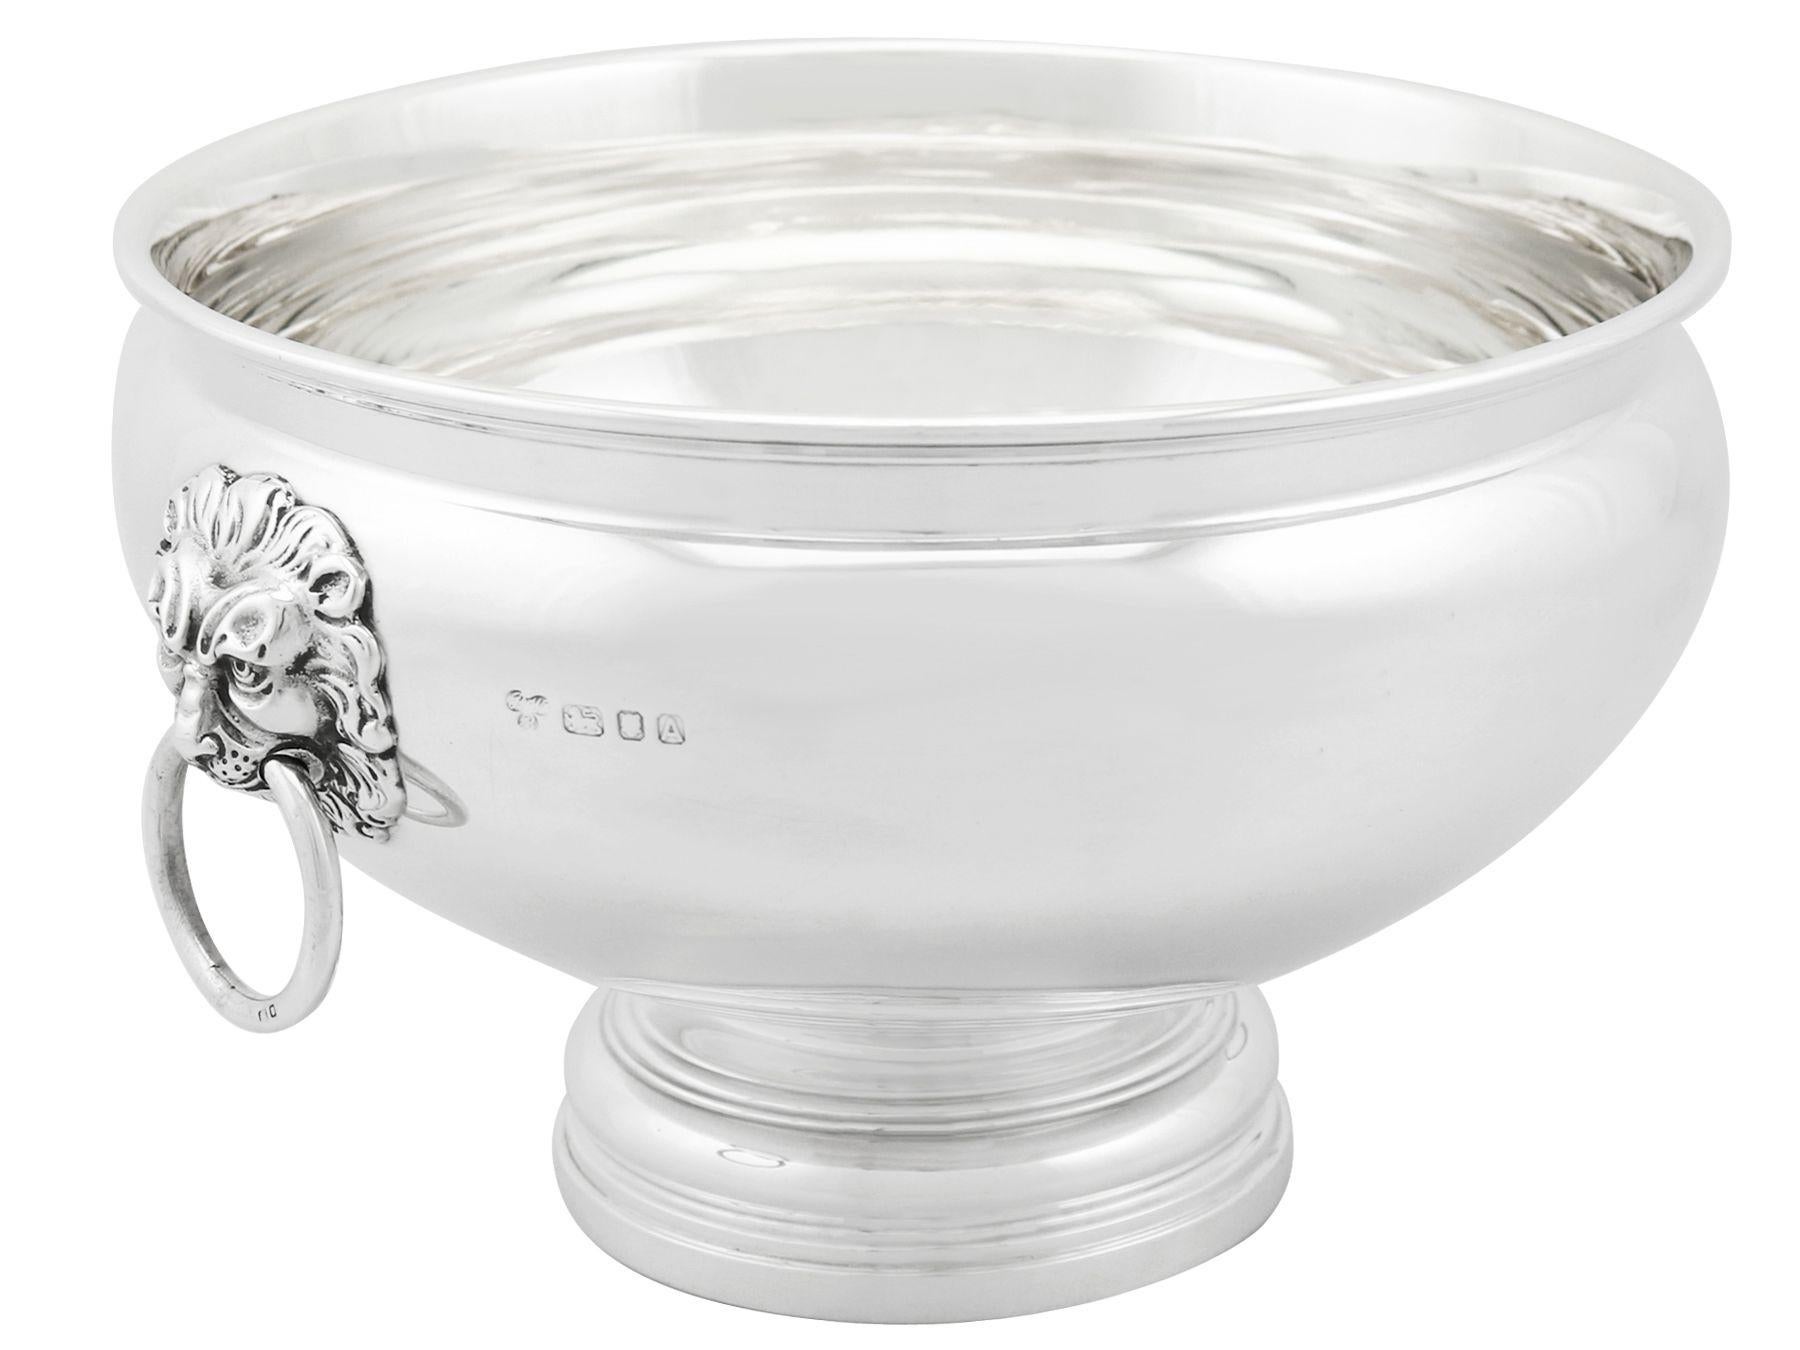 An exceptional, fine and impressive antique Edward VIII English sterling silver presentation bowl; an addition to our range of collectable silverware.

This exceptional antique Edward VIII English sterling silver bowl has a circular rounded form